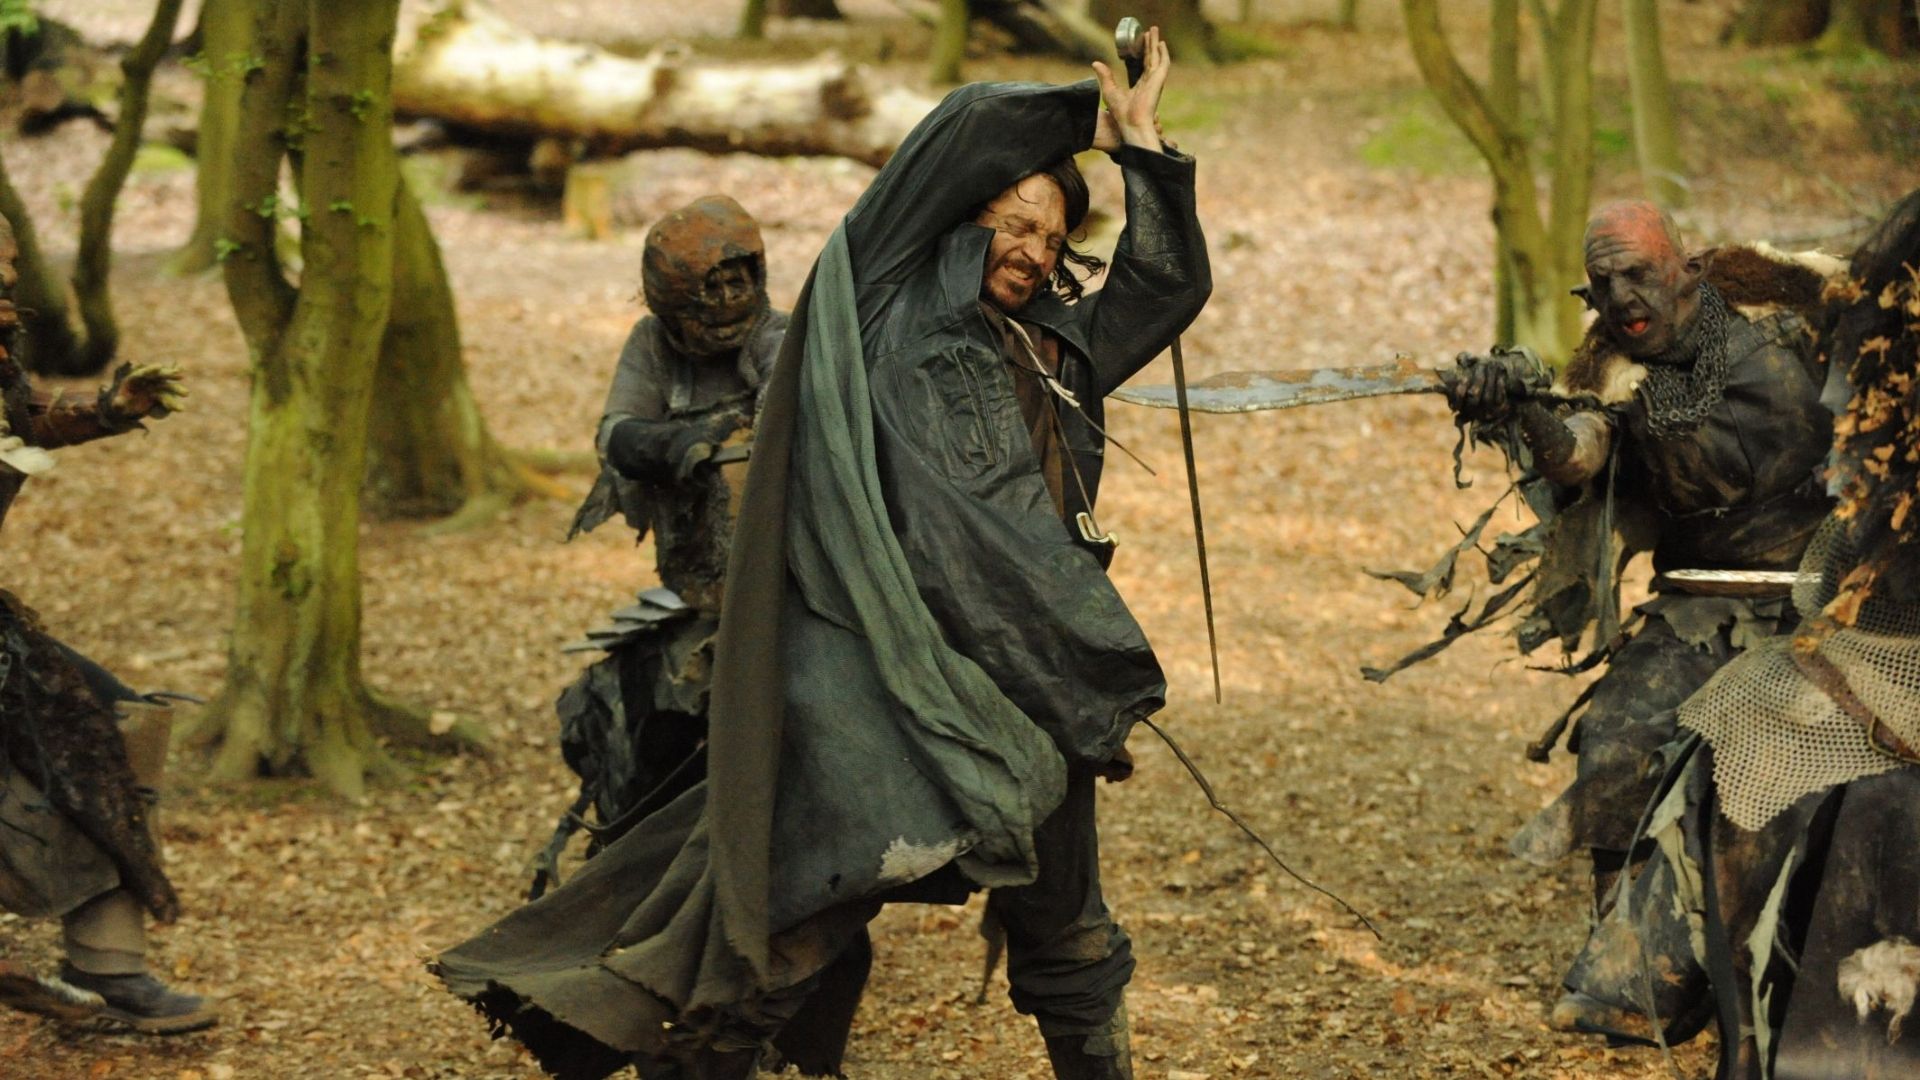 Adrian Webster as Aragorn in The Hunt for Gollum, a Lord of the Rings fan film from 2009